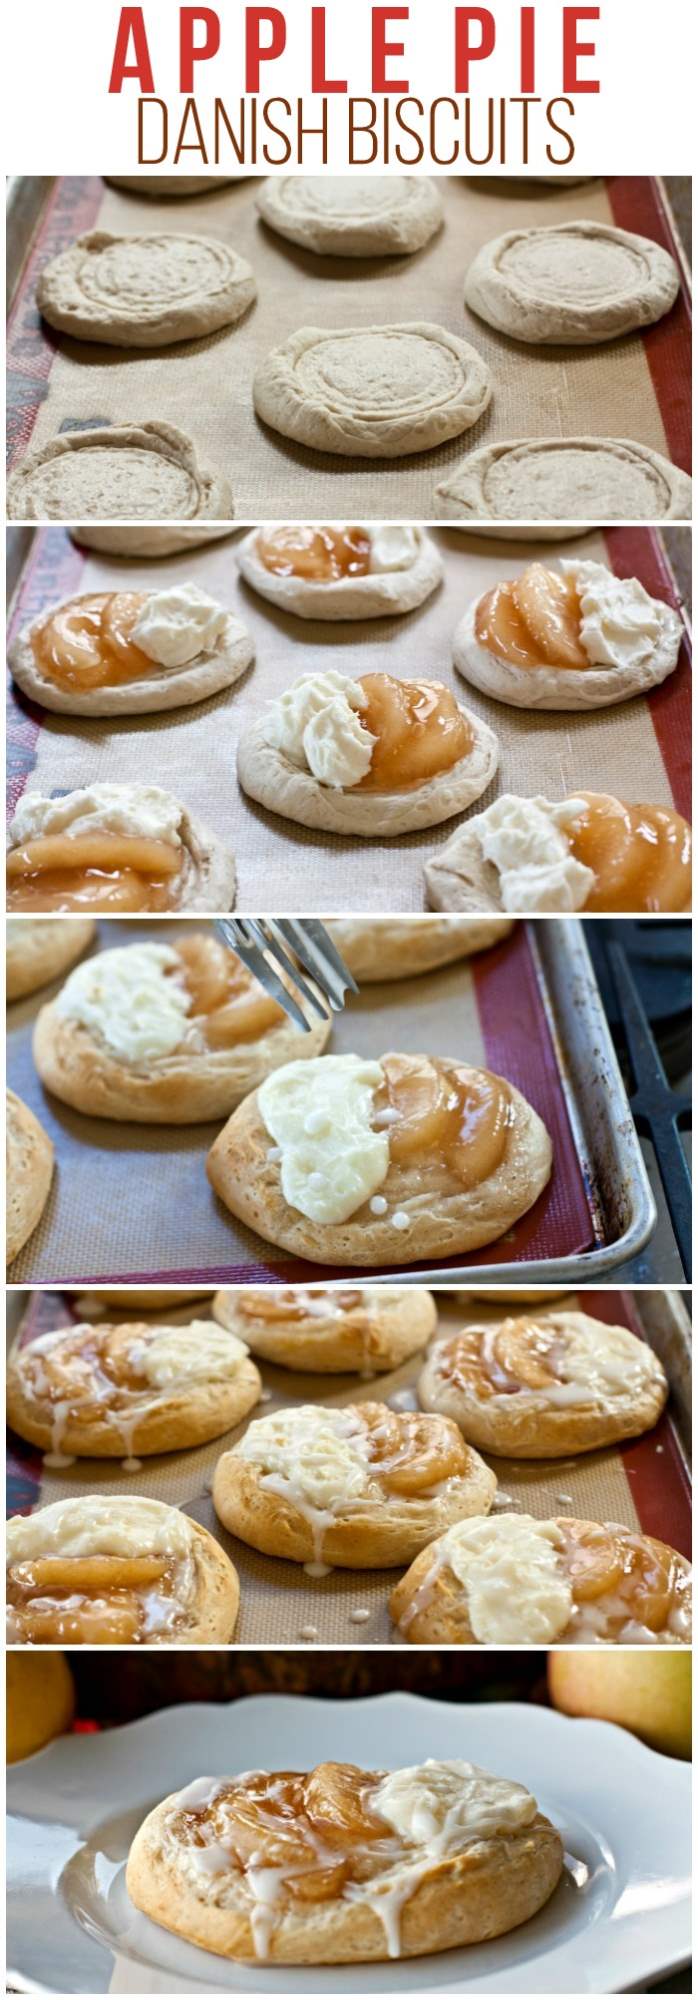 Picture collage of how to make apple pie danishes.